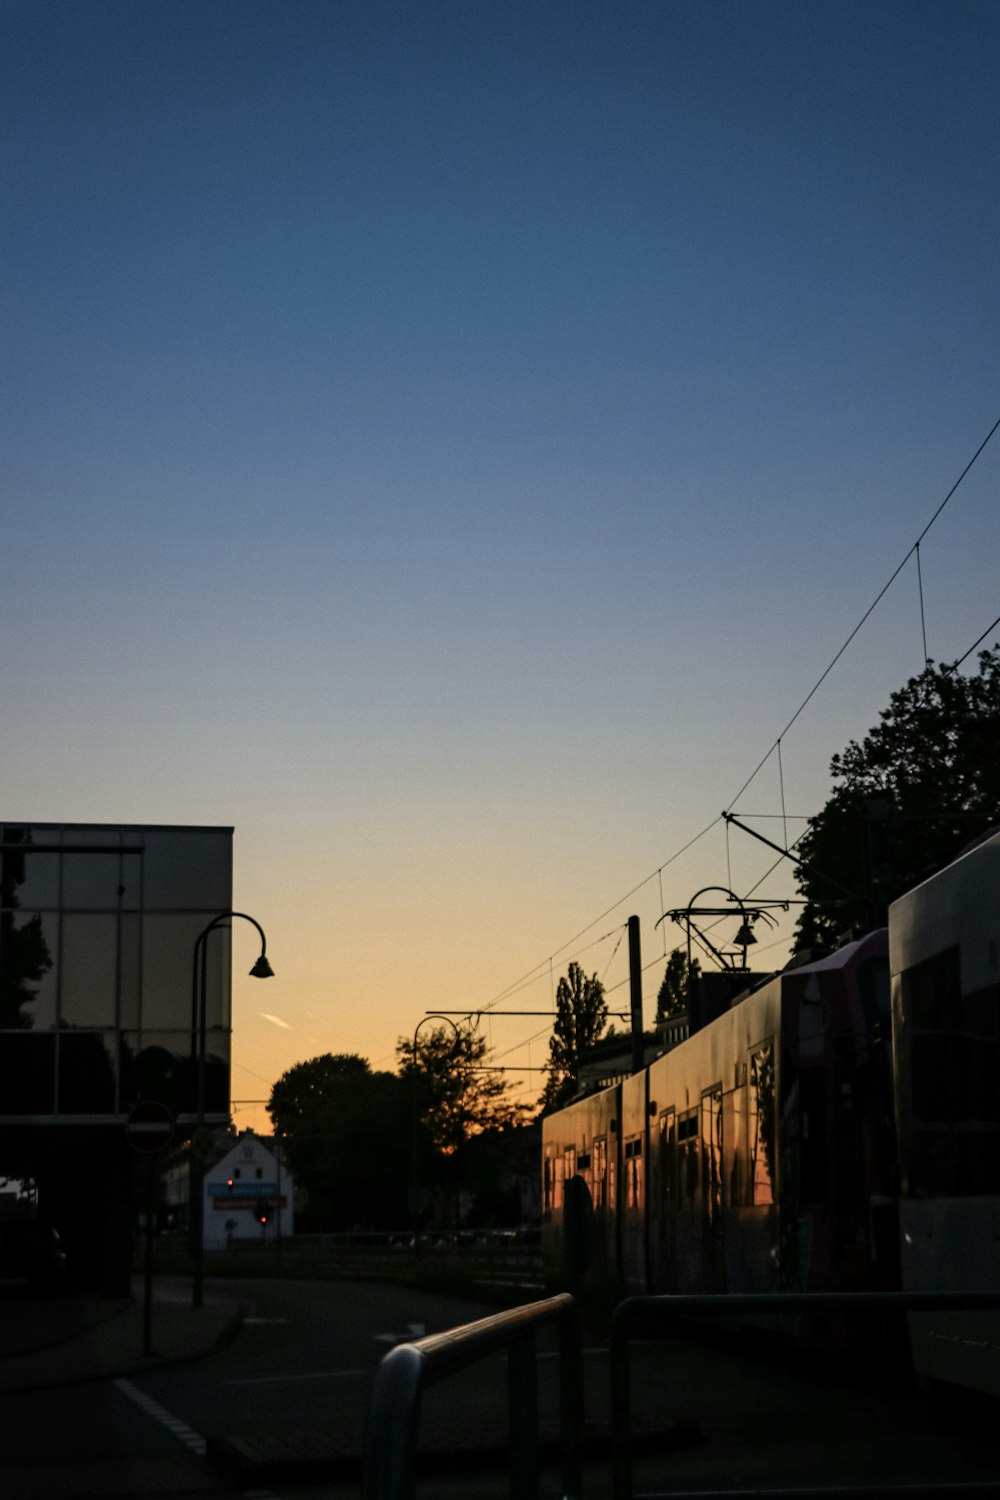 the sun is setting behind a train on the tracks